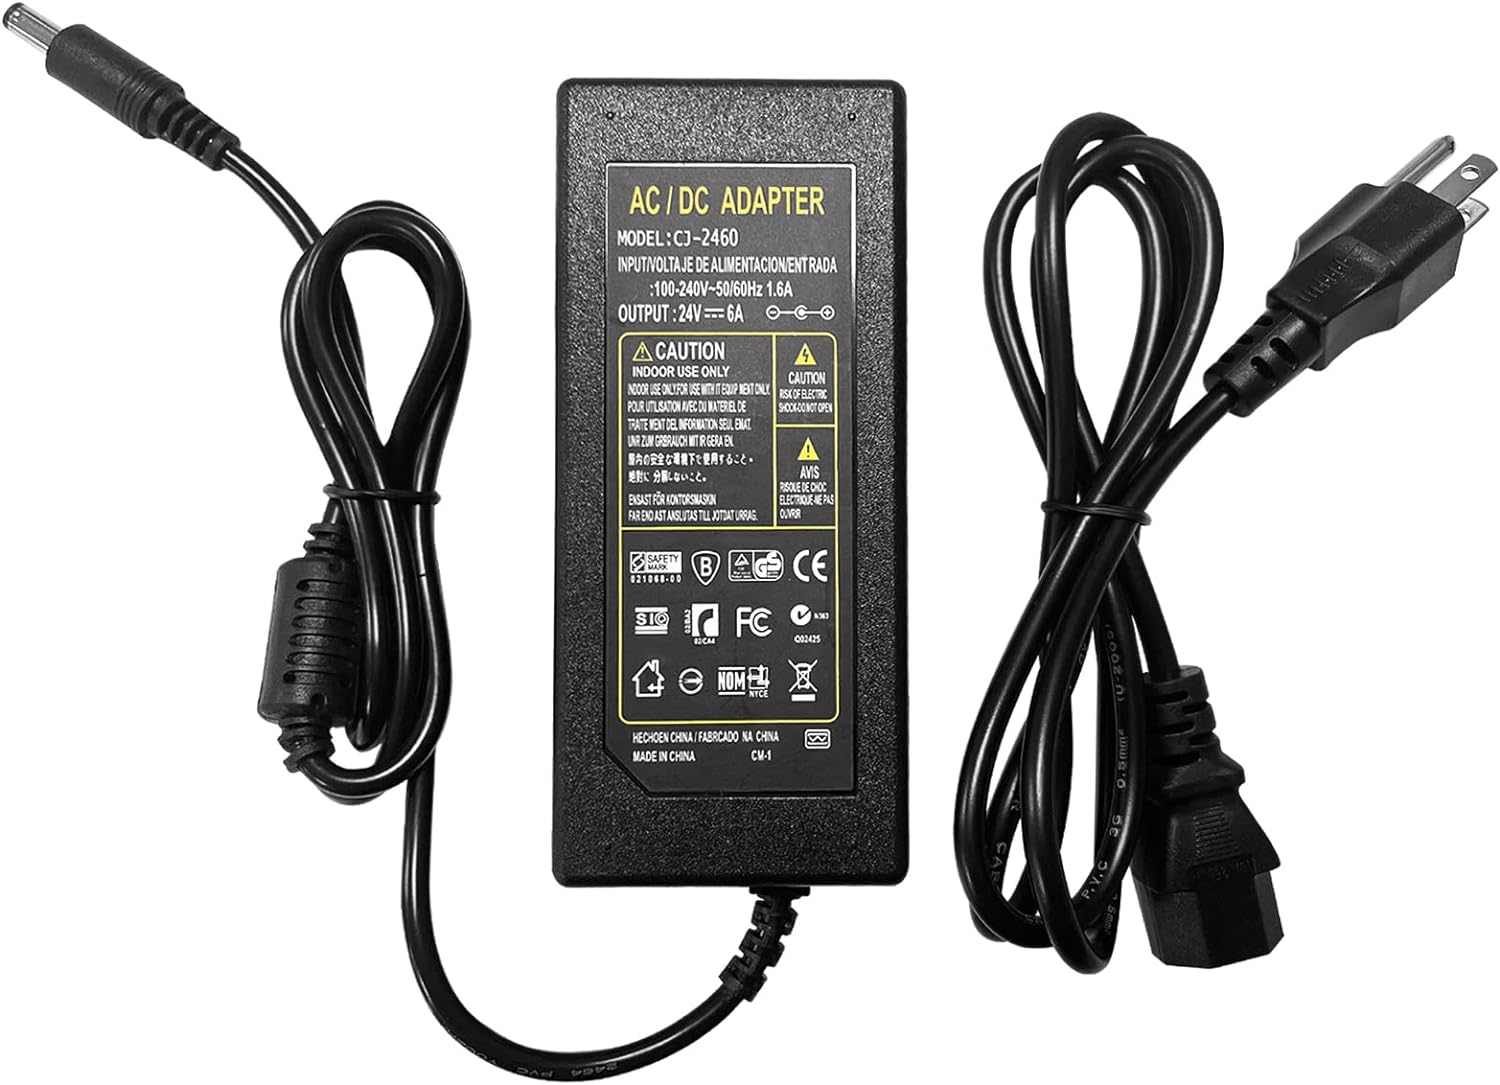 12V 6A Power Supply AC to DC Adapter for LED Light Survilliance Camera 5.5 x 2.5 